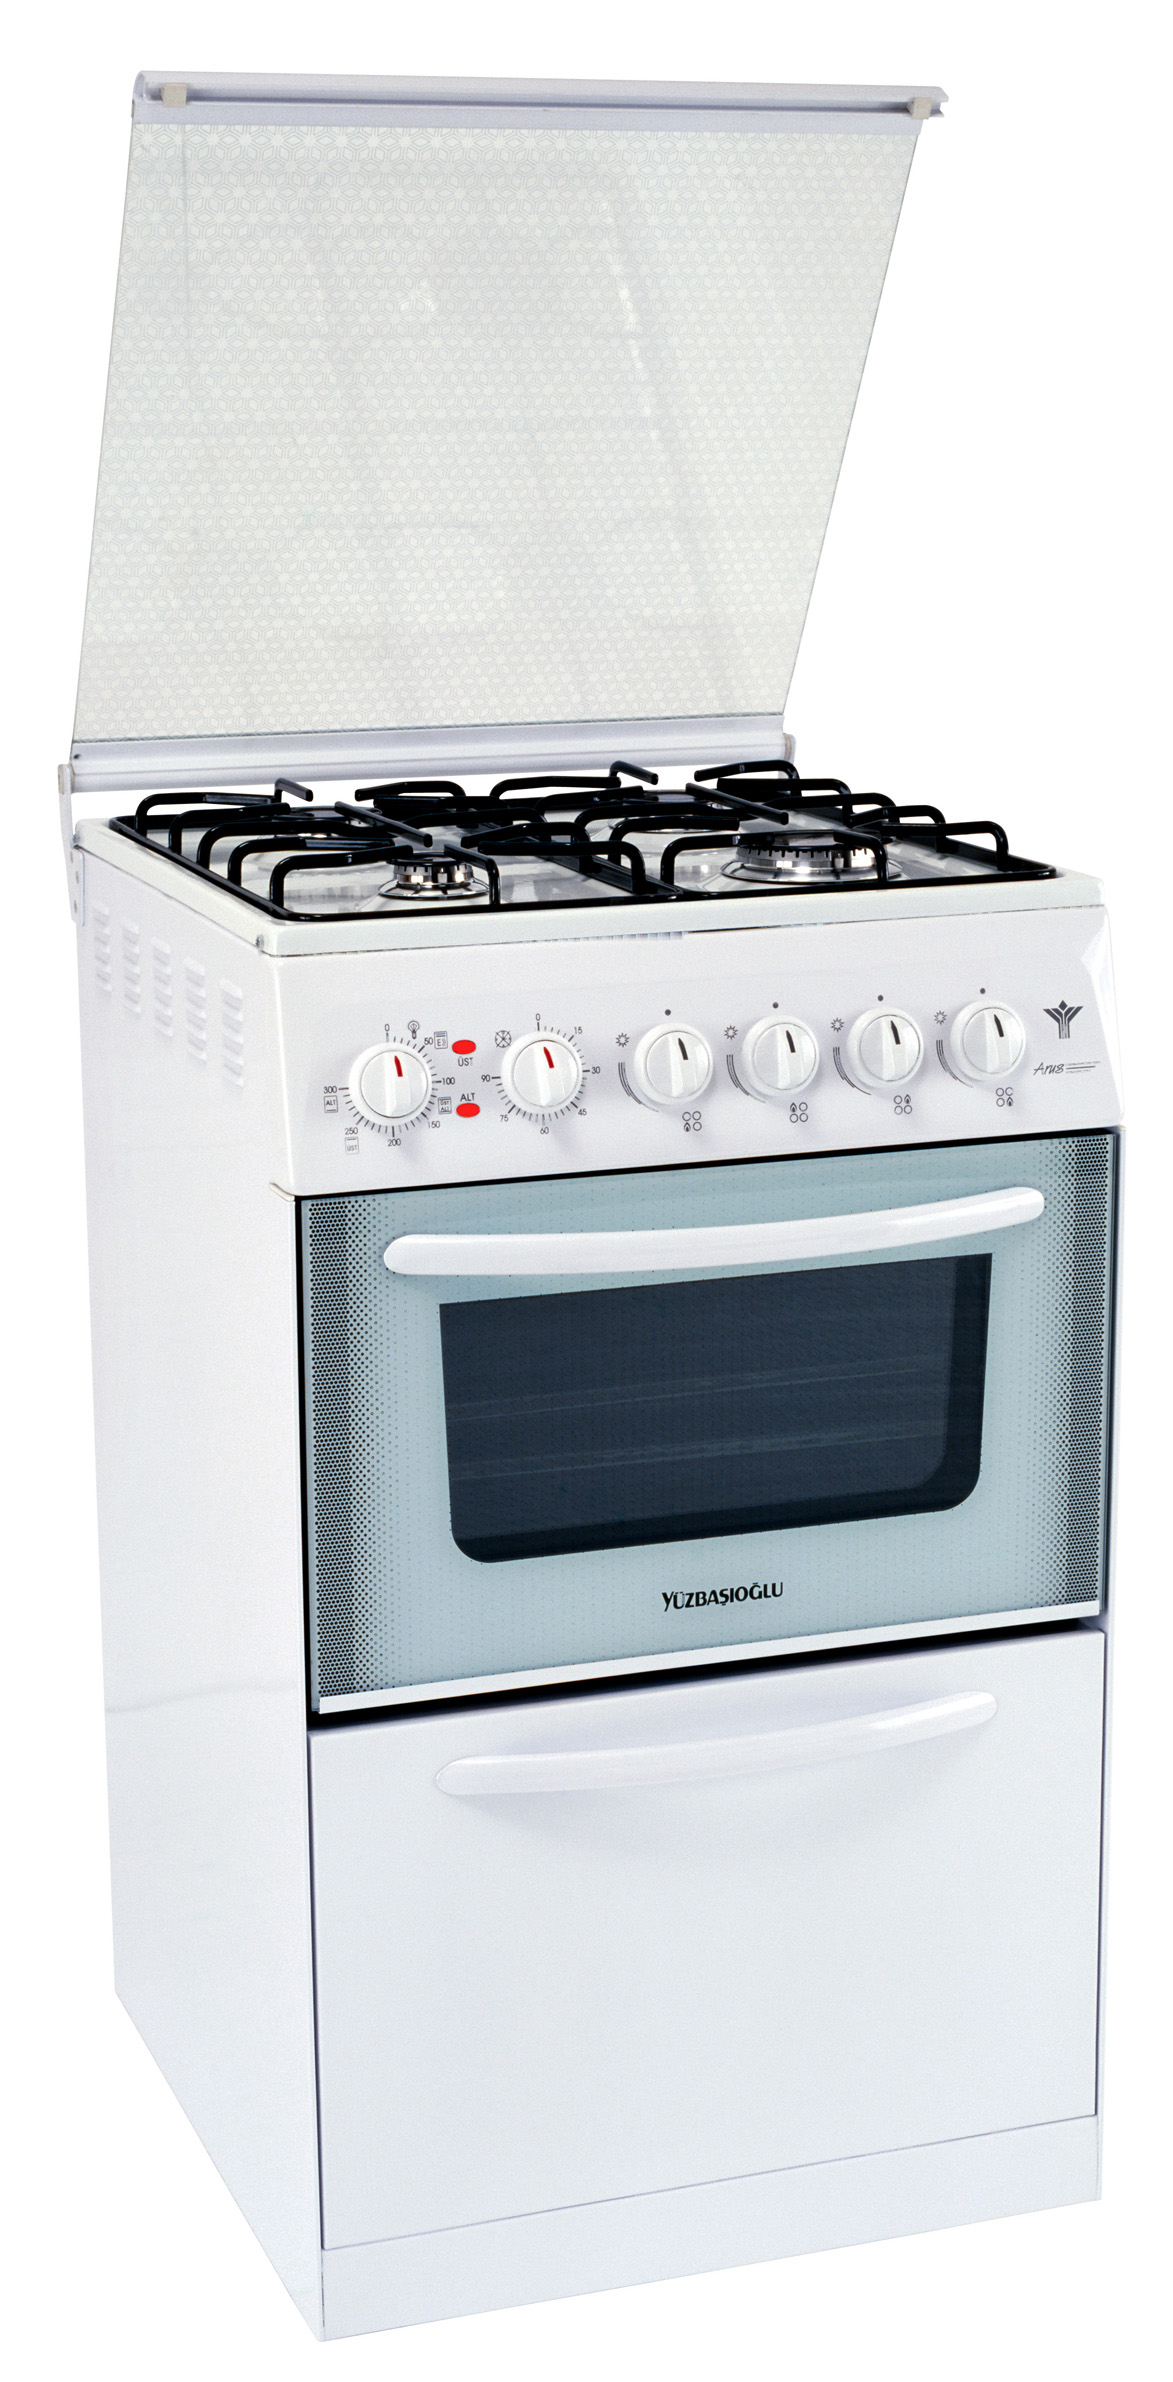 Free Standing Oven